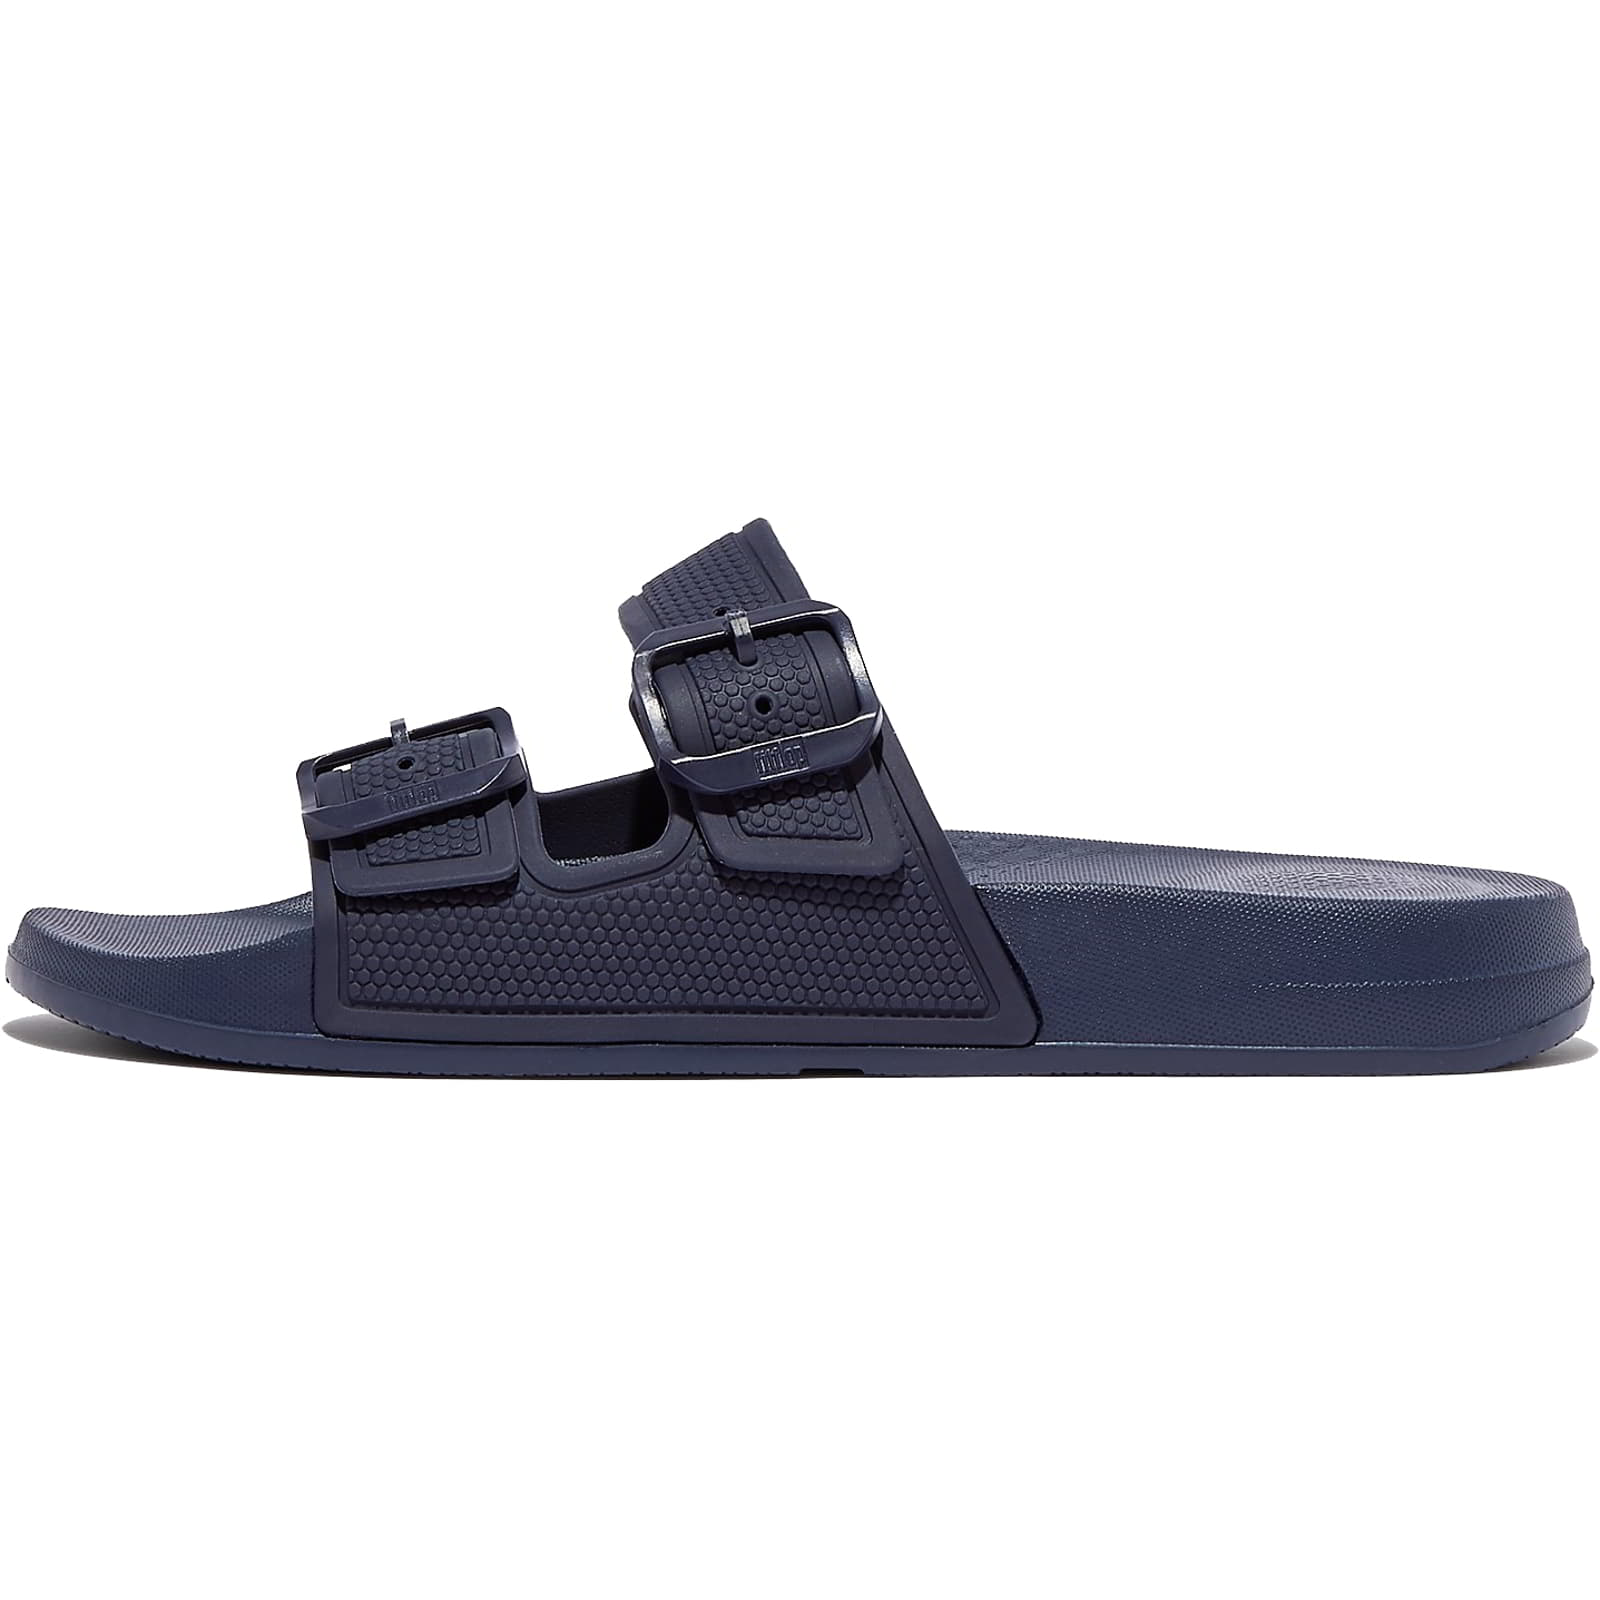 FitFlop Women's Iqushion Pool Slides Sandals - UK 6